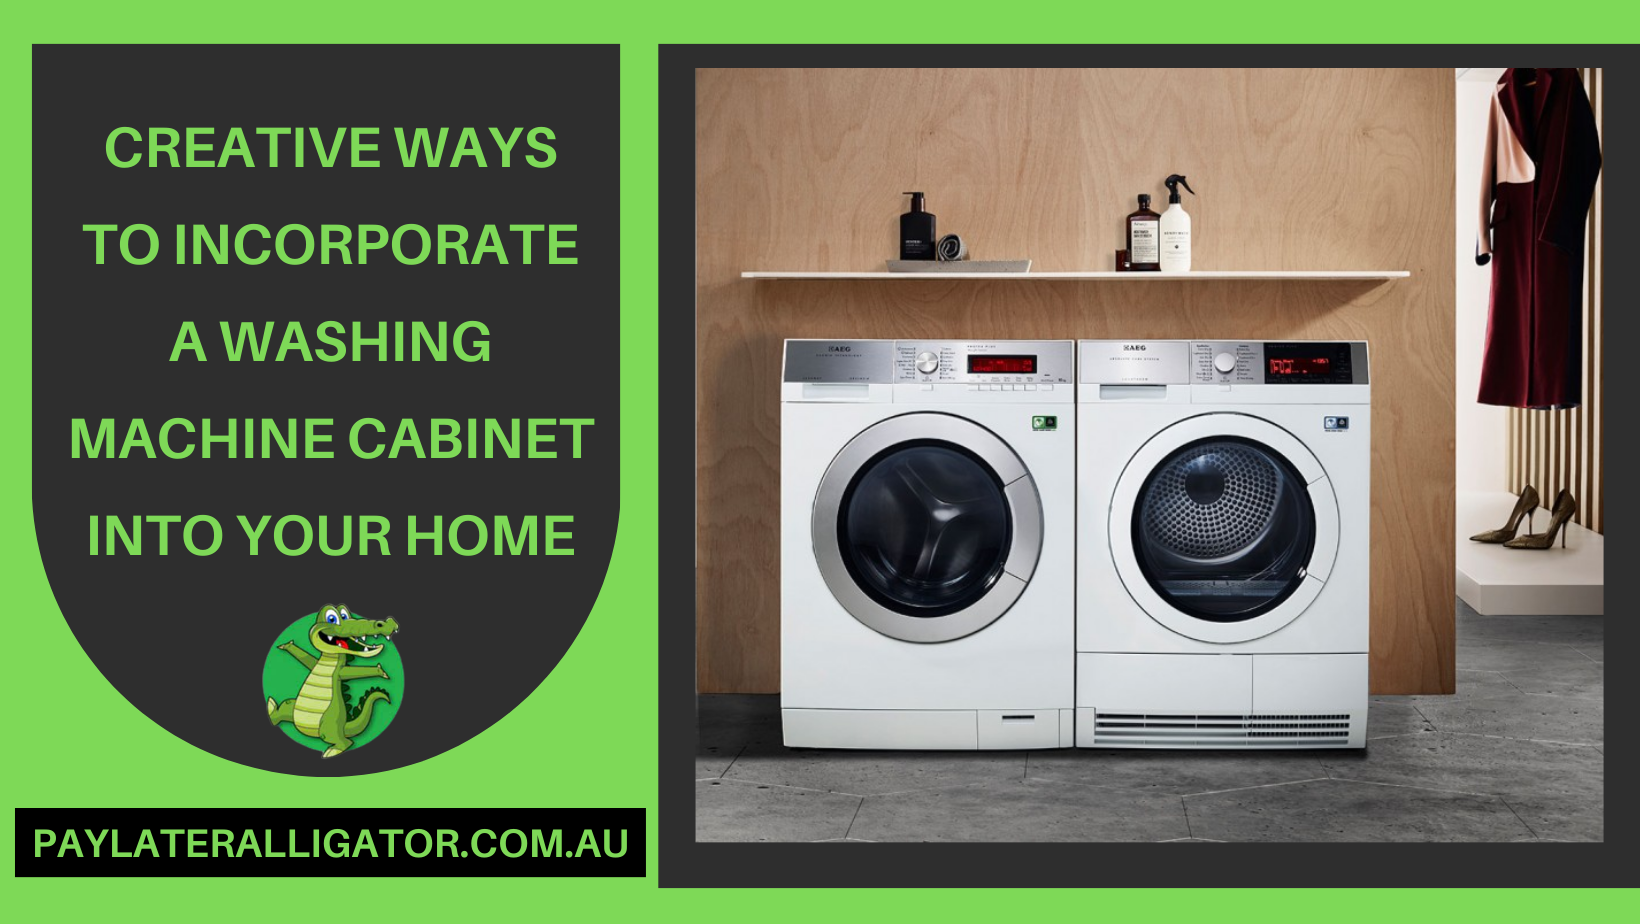 Creative Ways to Incorporate a Washing Machine Cabinet into Your Home